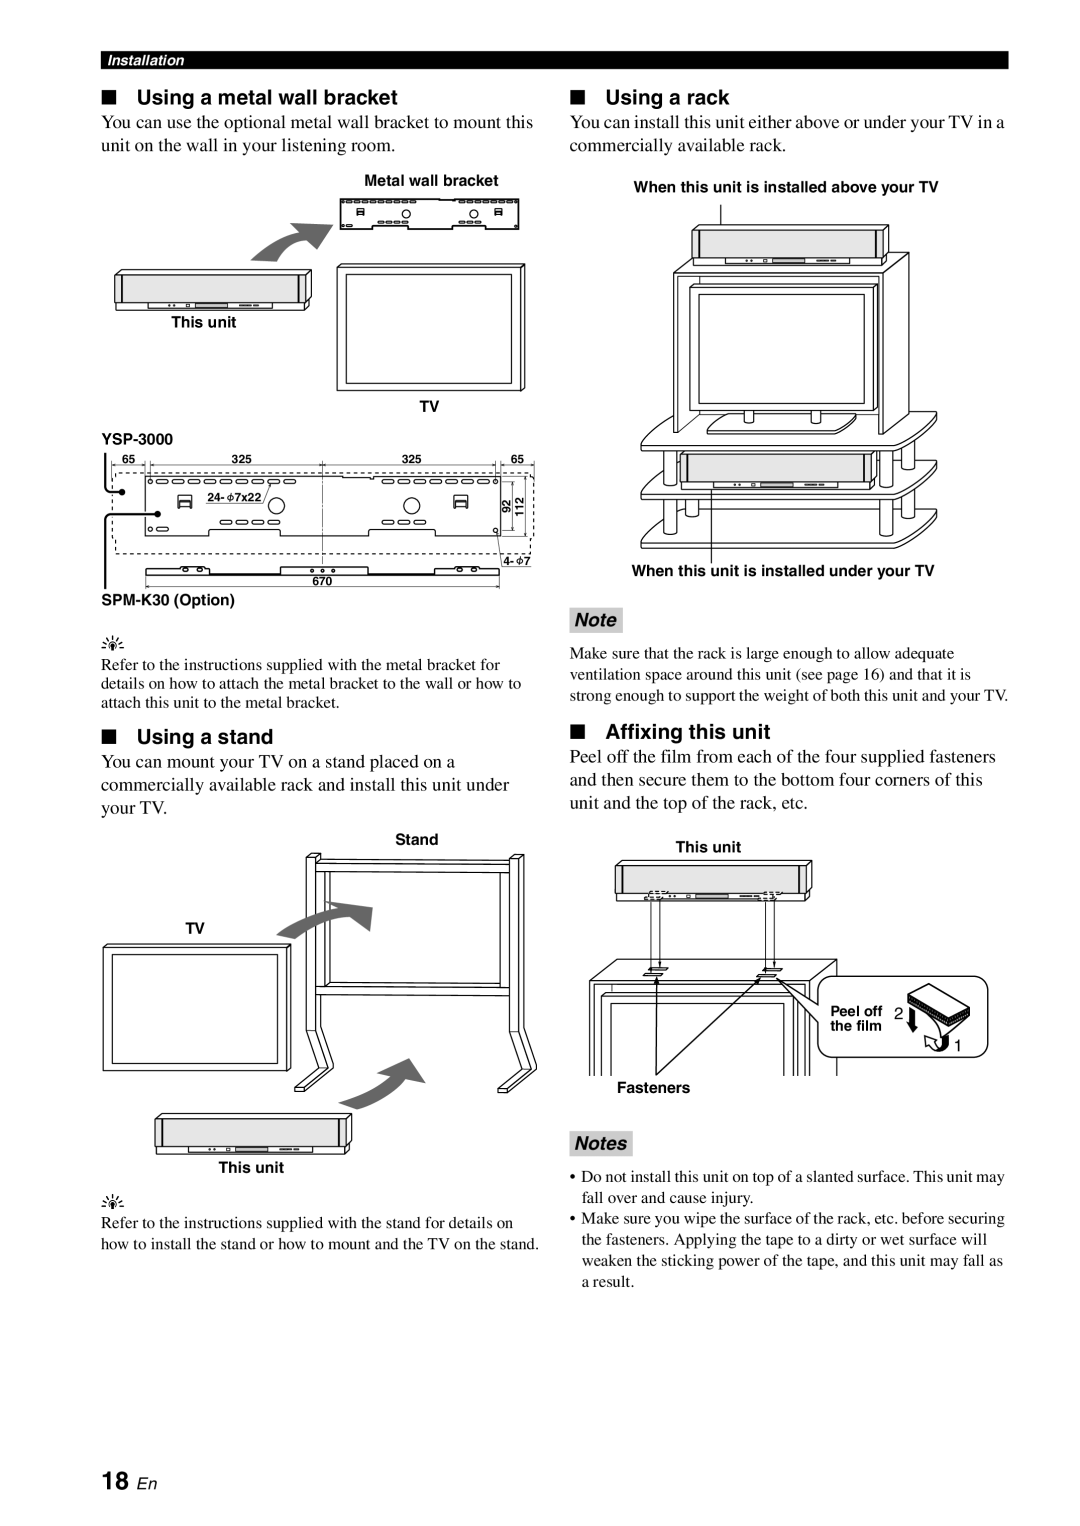 Yamaha YSP-3000 owner manual 18 En, Using a metal wall bracket, Using a rack, Using a stand, Affixing this unit, Notes 